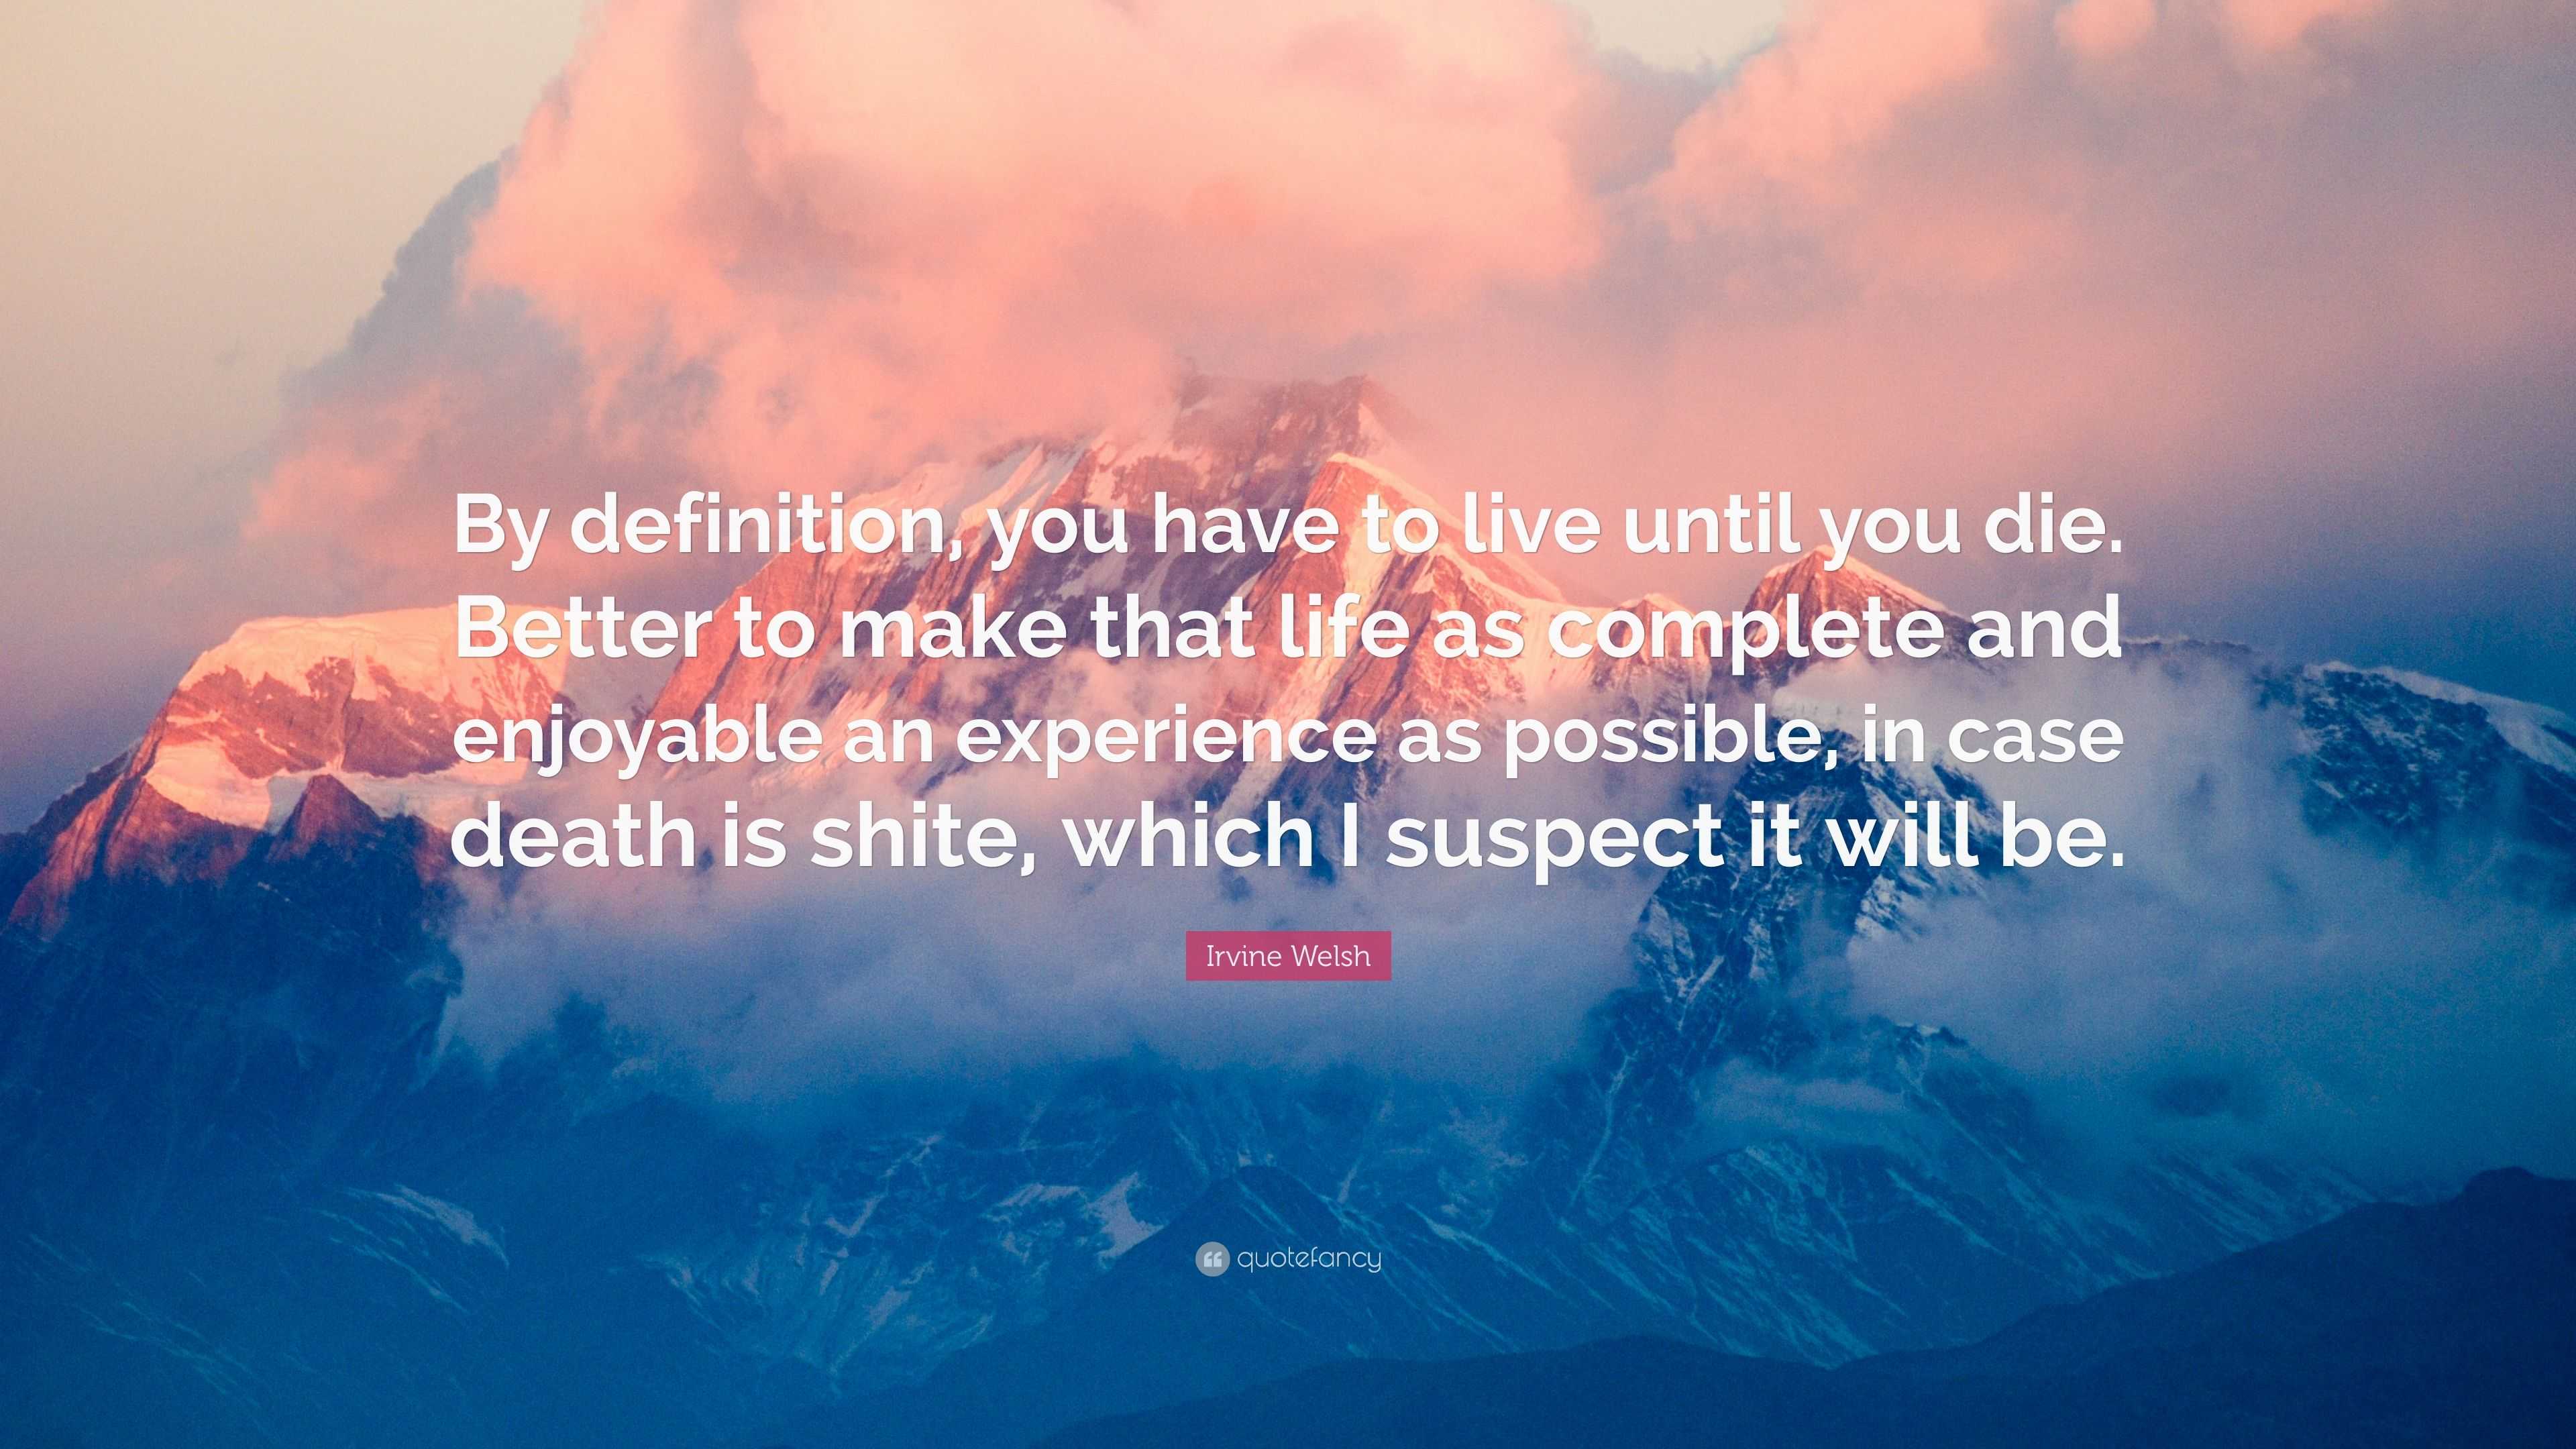 Irvine Welsh Quote: “By definition, you have to live until you die ...